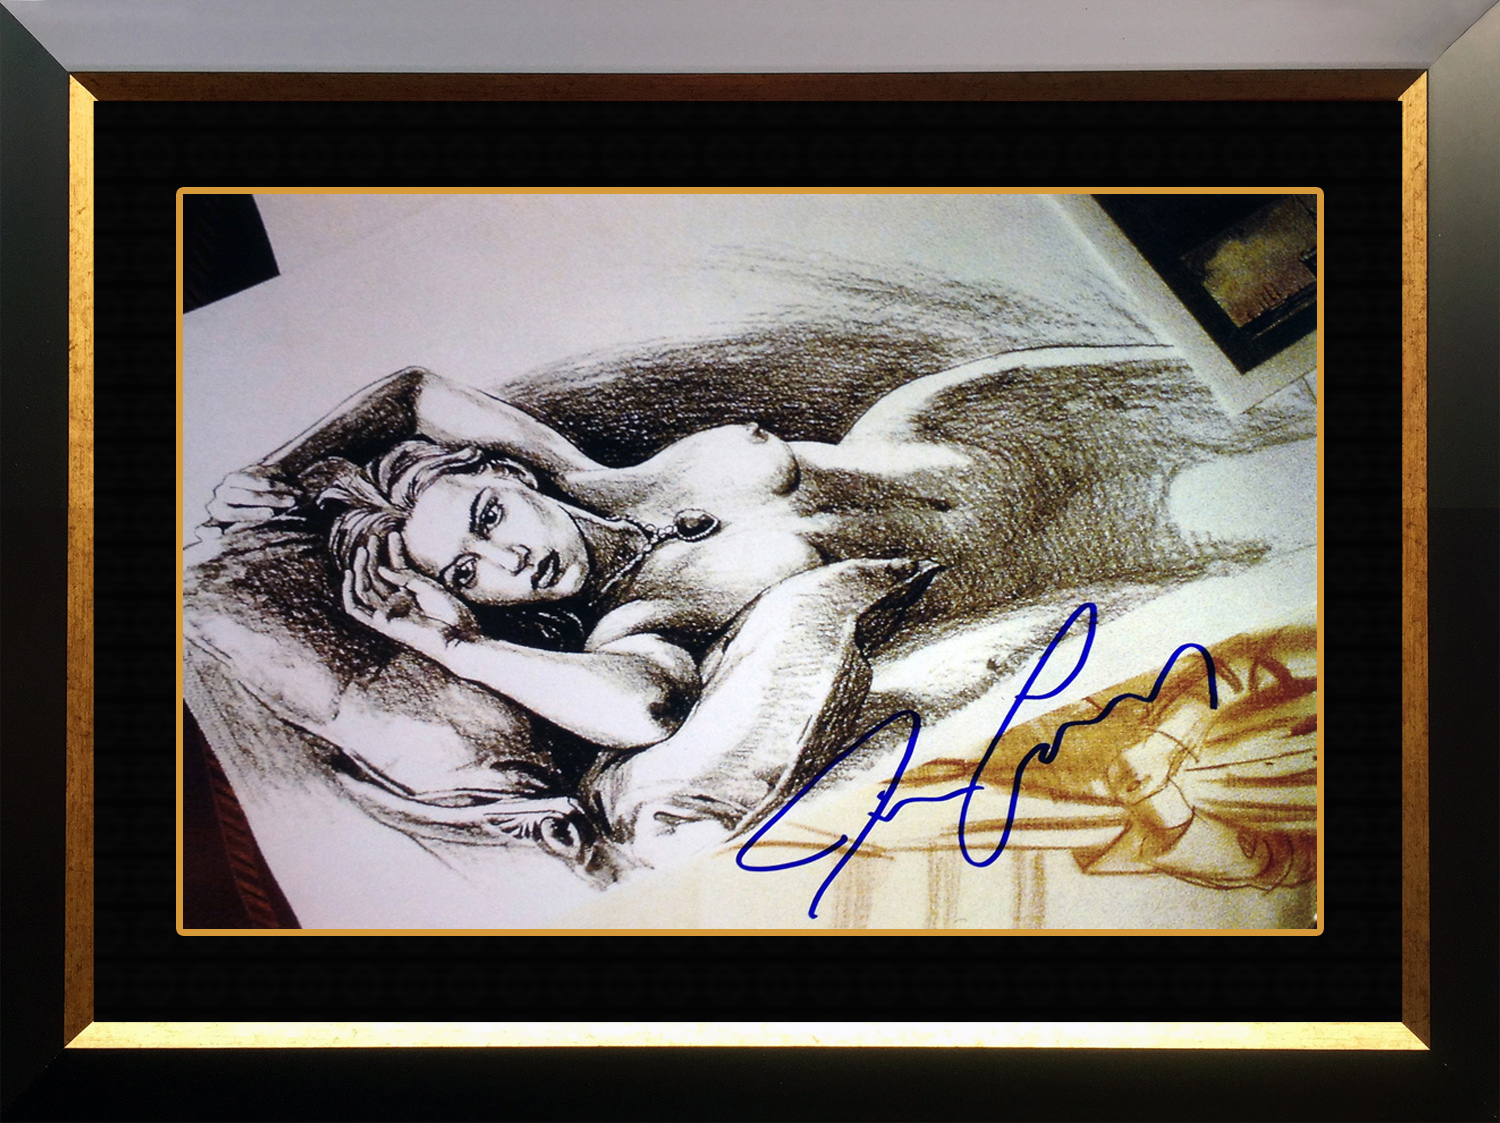 Titanic "Jack's Drawing", Facsimile Signed by James Cameron 